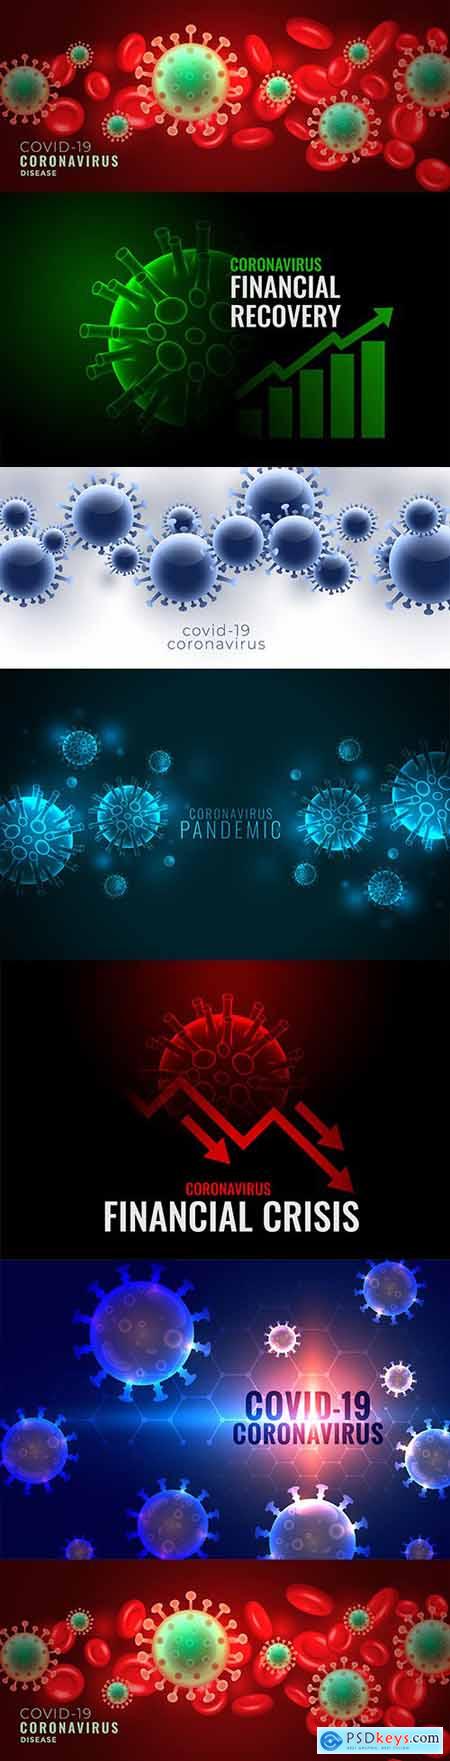 Coronavirus covid-19 pandemic banner with viral cells